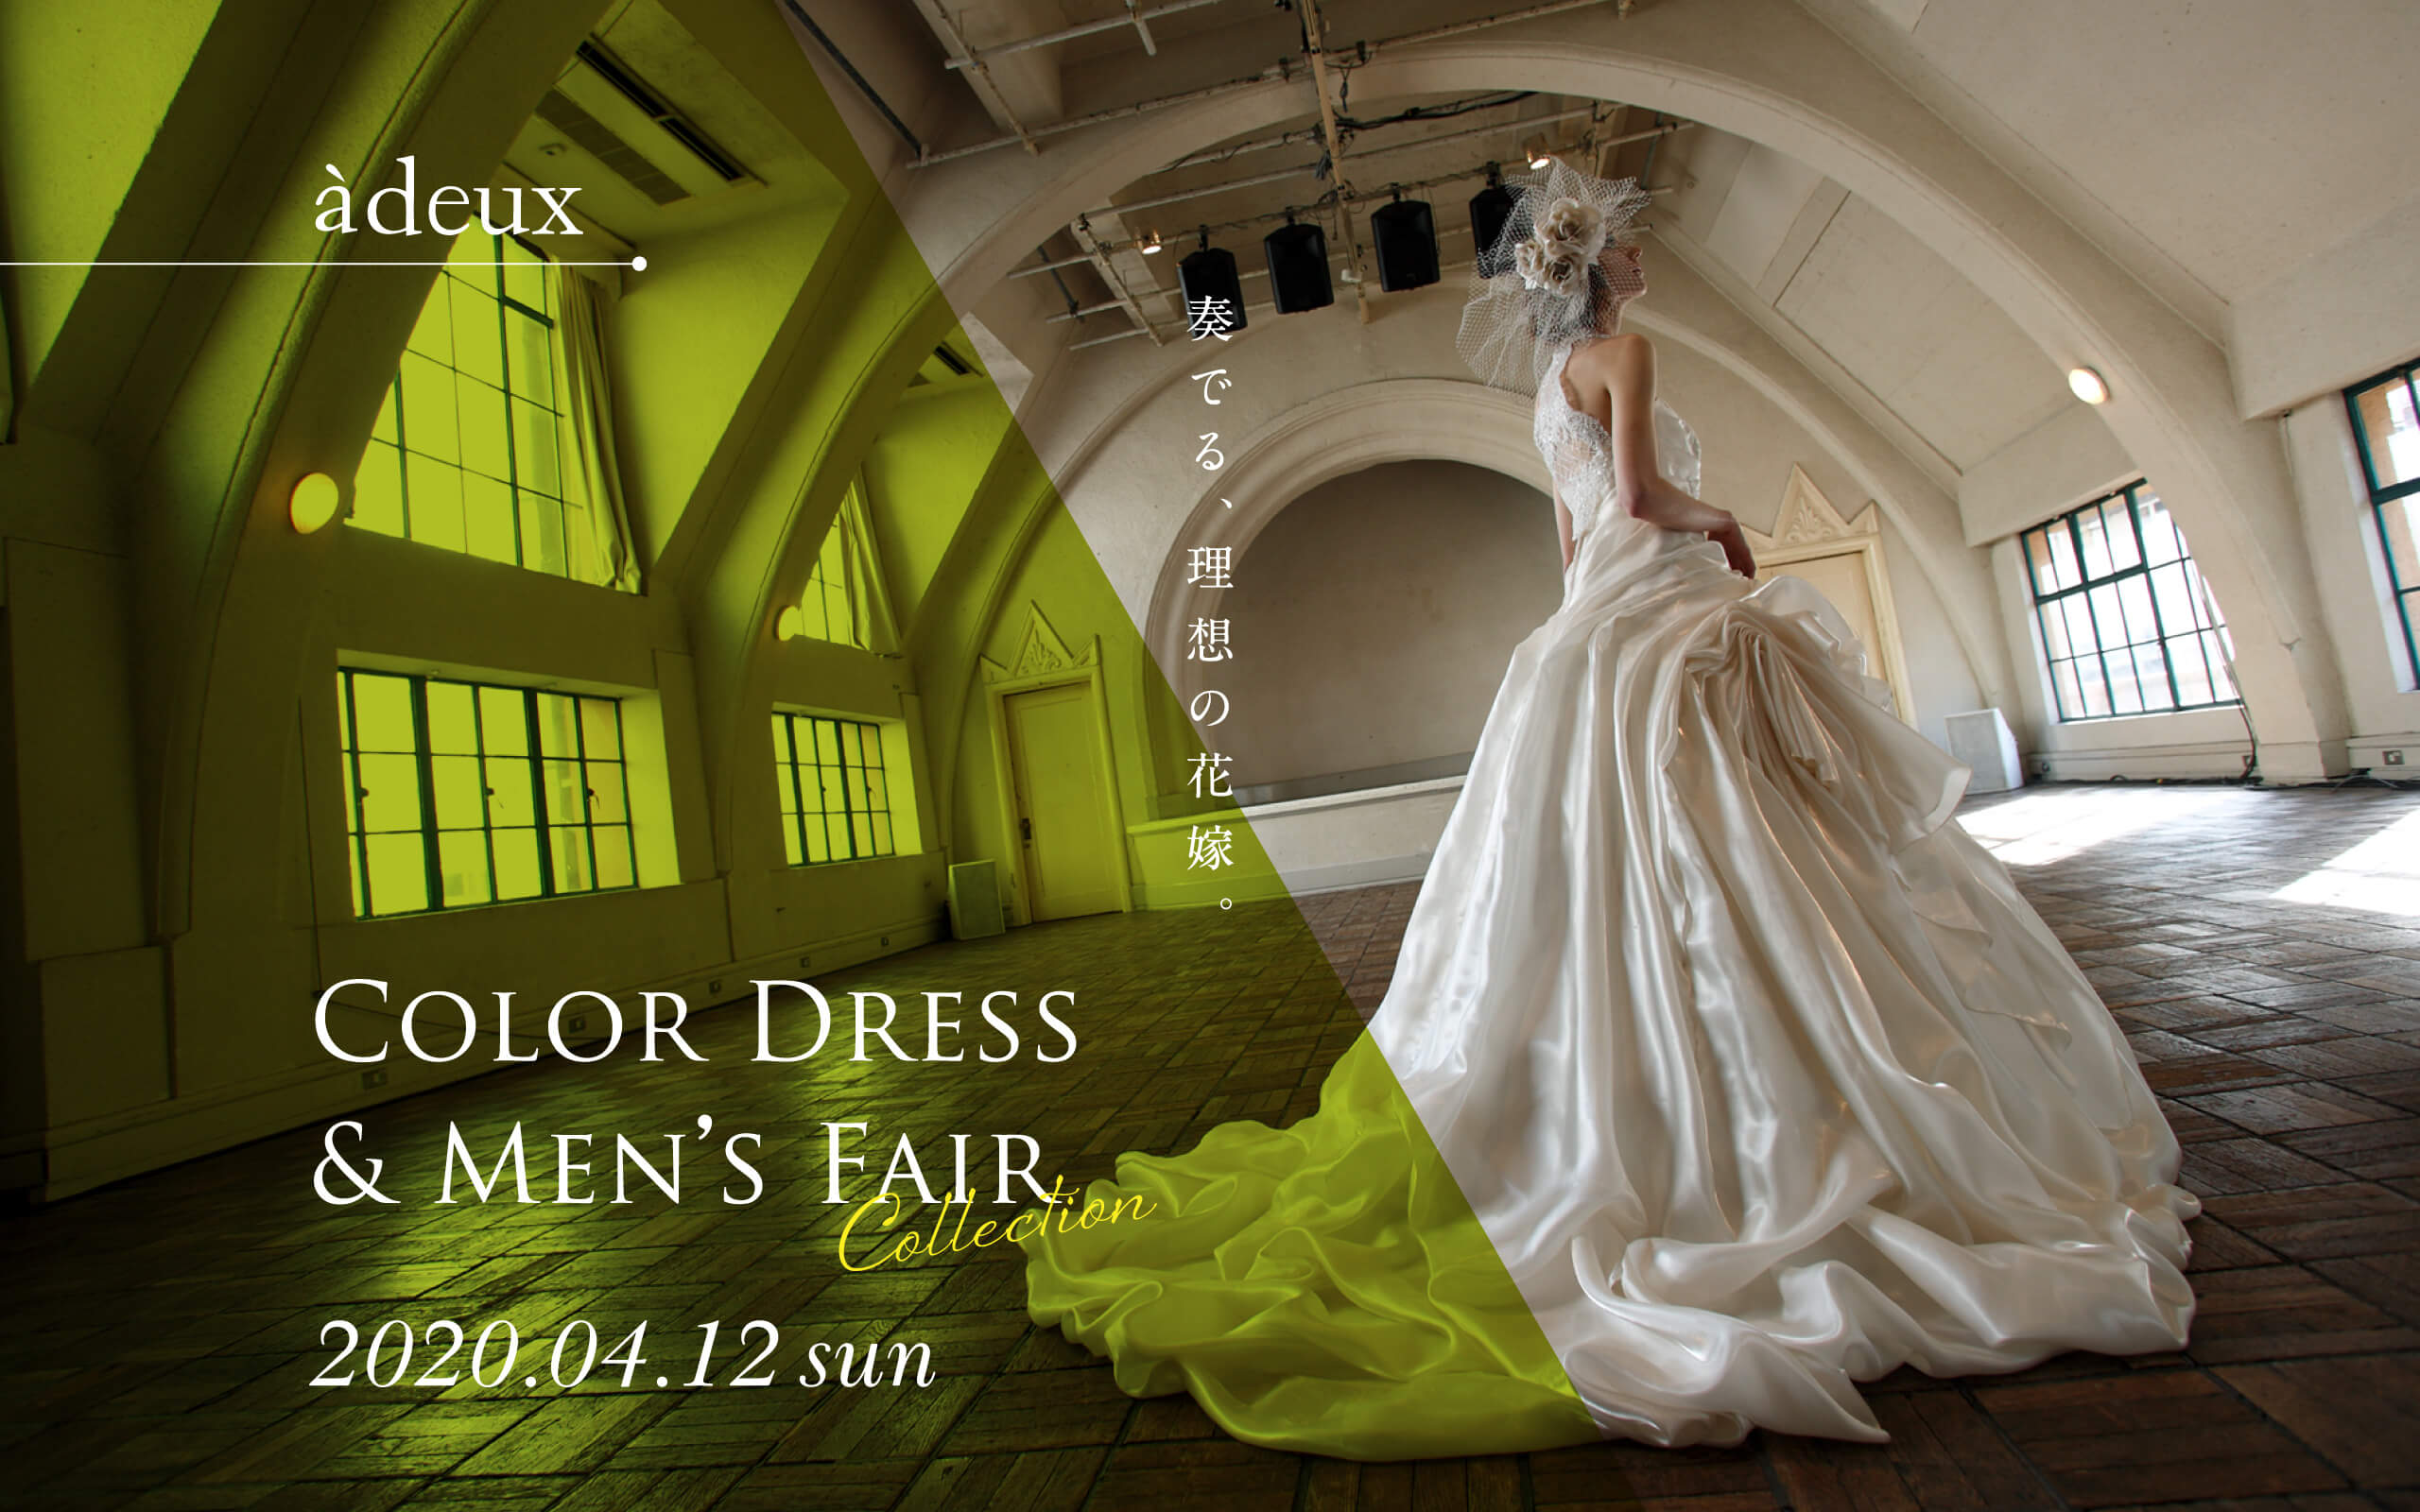 New Color Dress Collection & Fitting 2020.04.12.sun